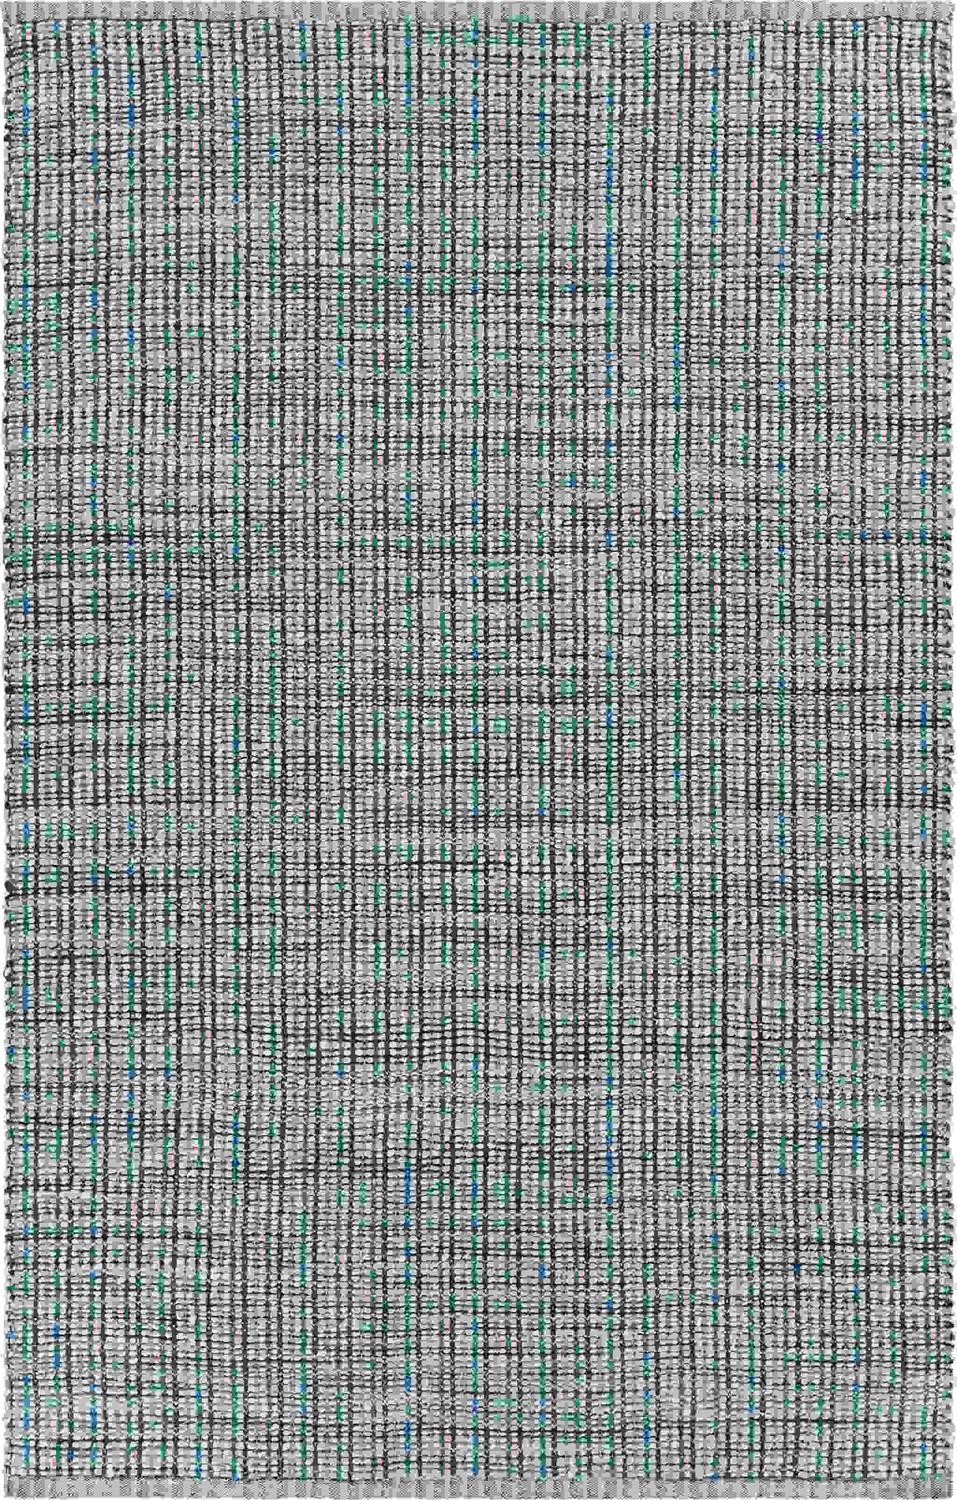 2 x 3 Classic Blue Jute Scatter Rug